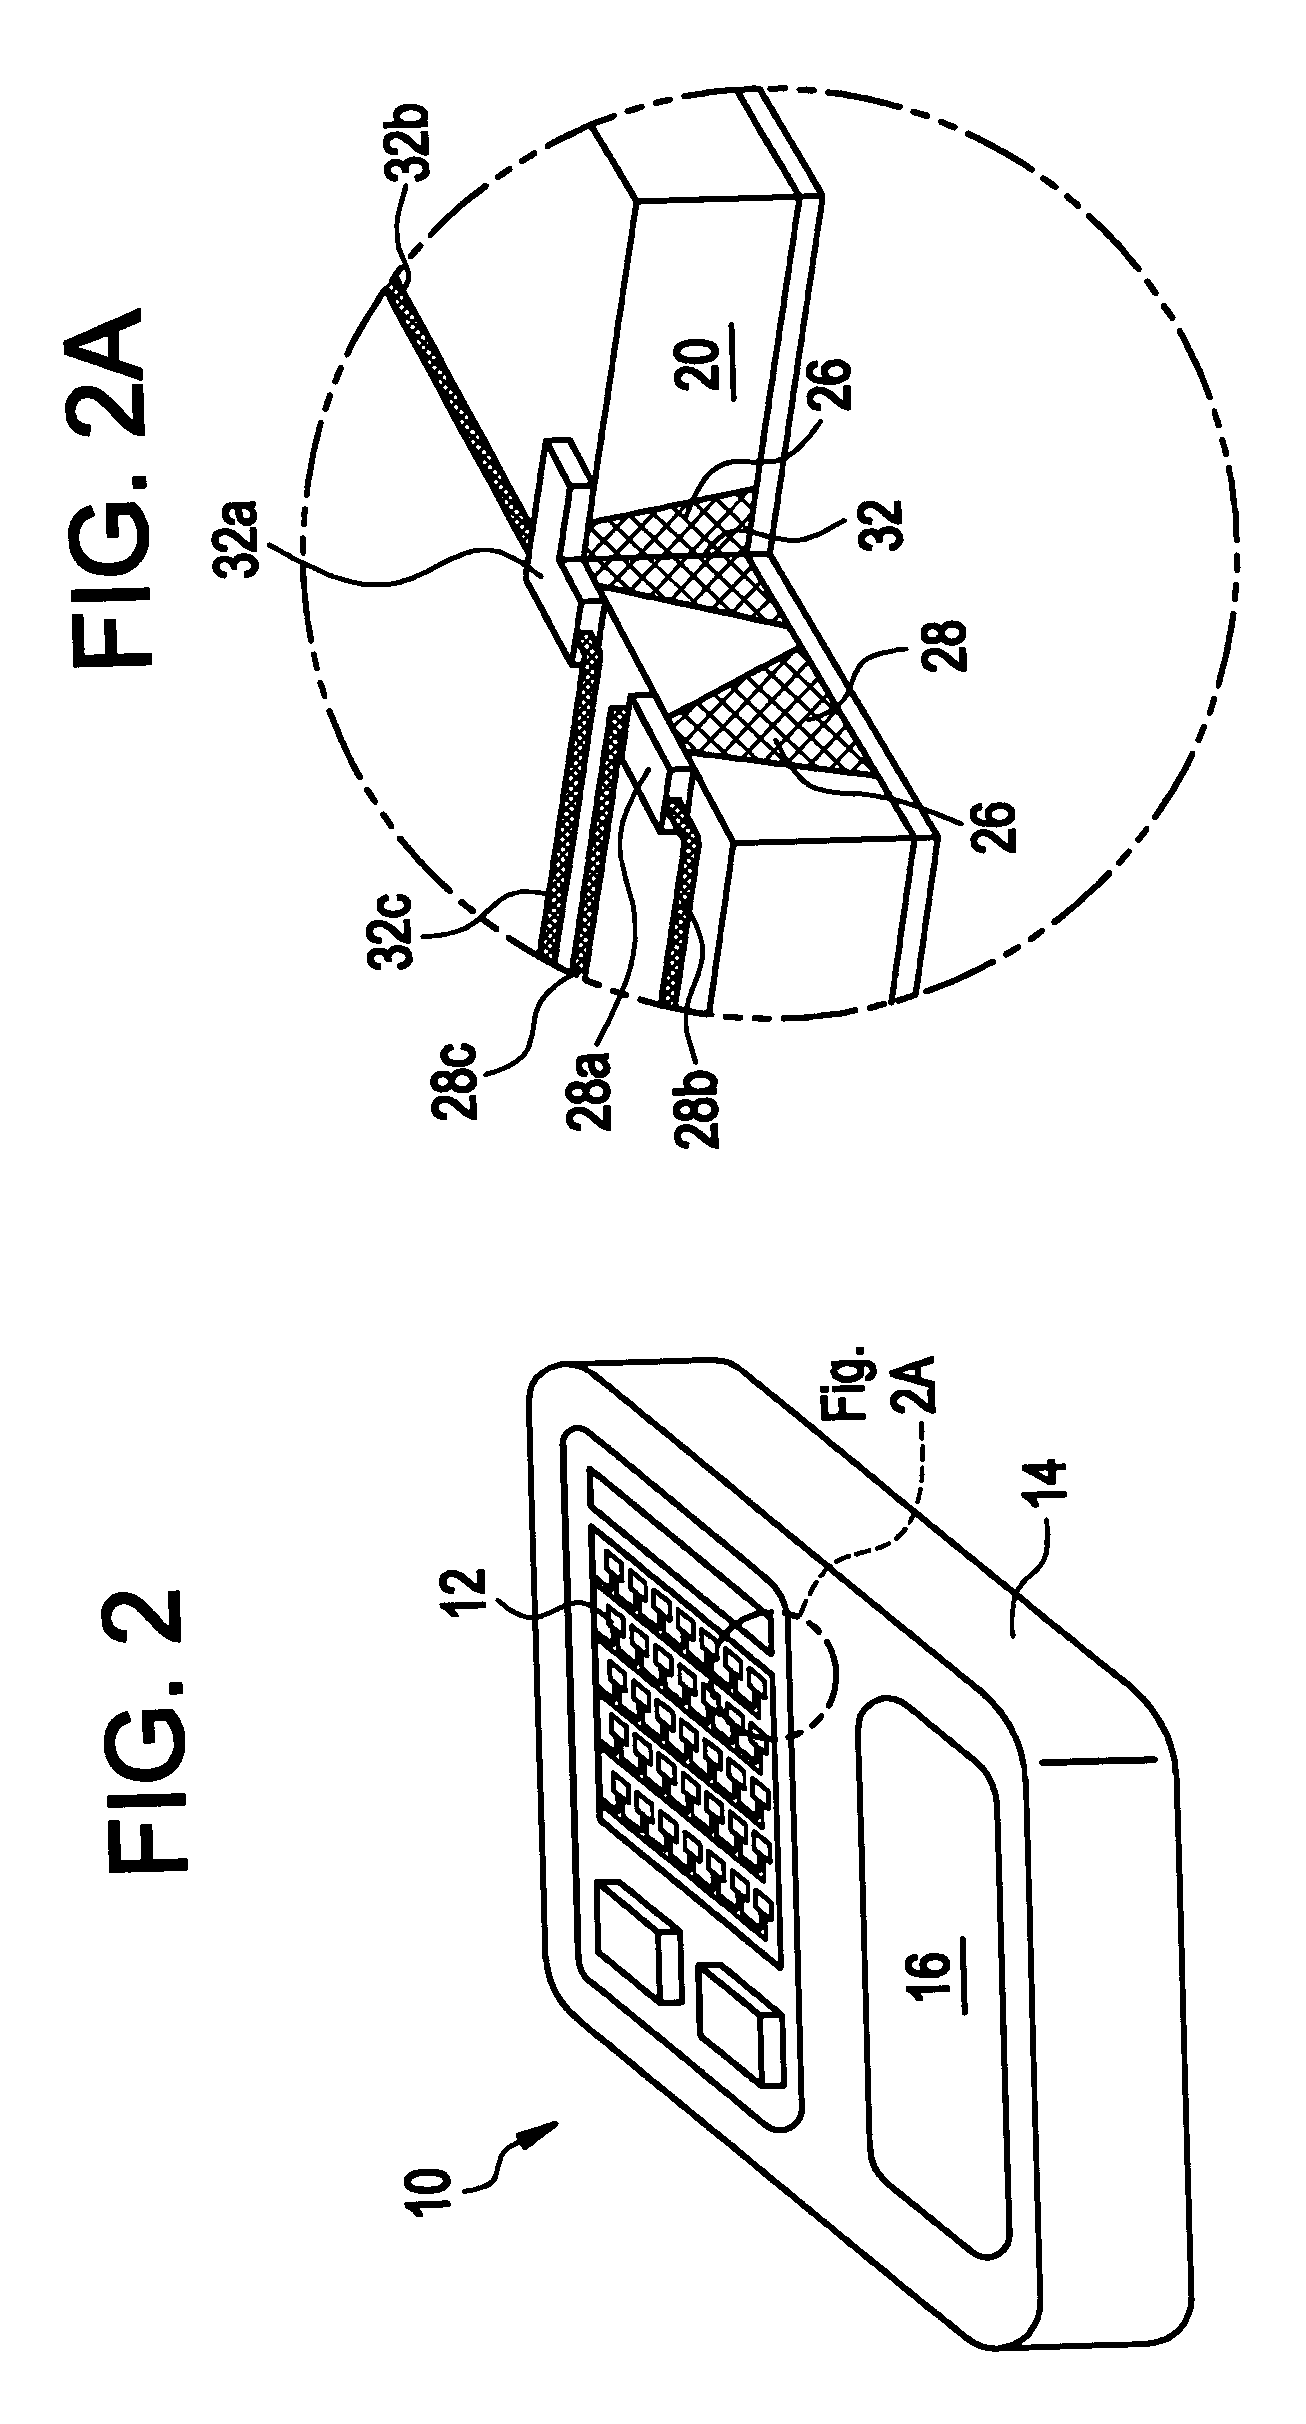 Method and device for the controlled delivery of parathyroid hormone